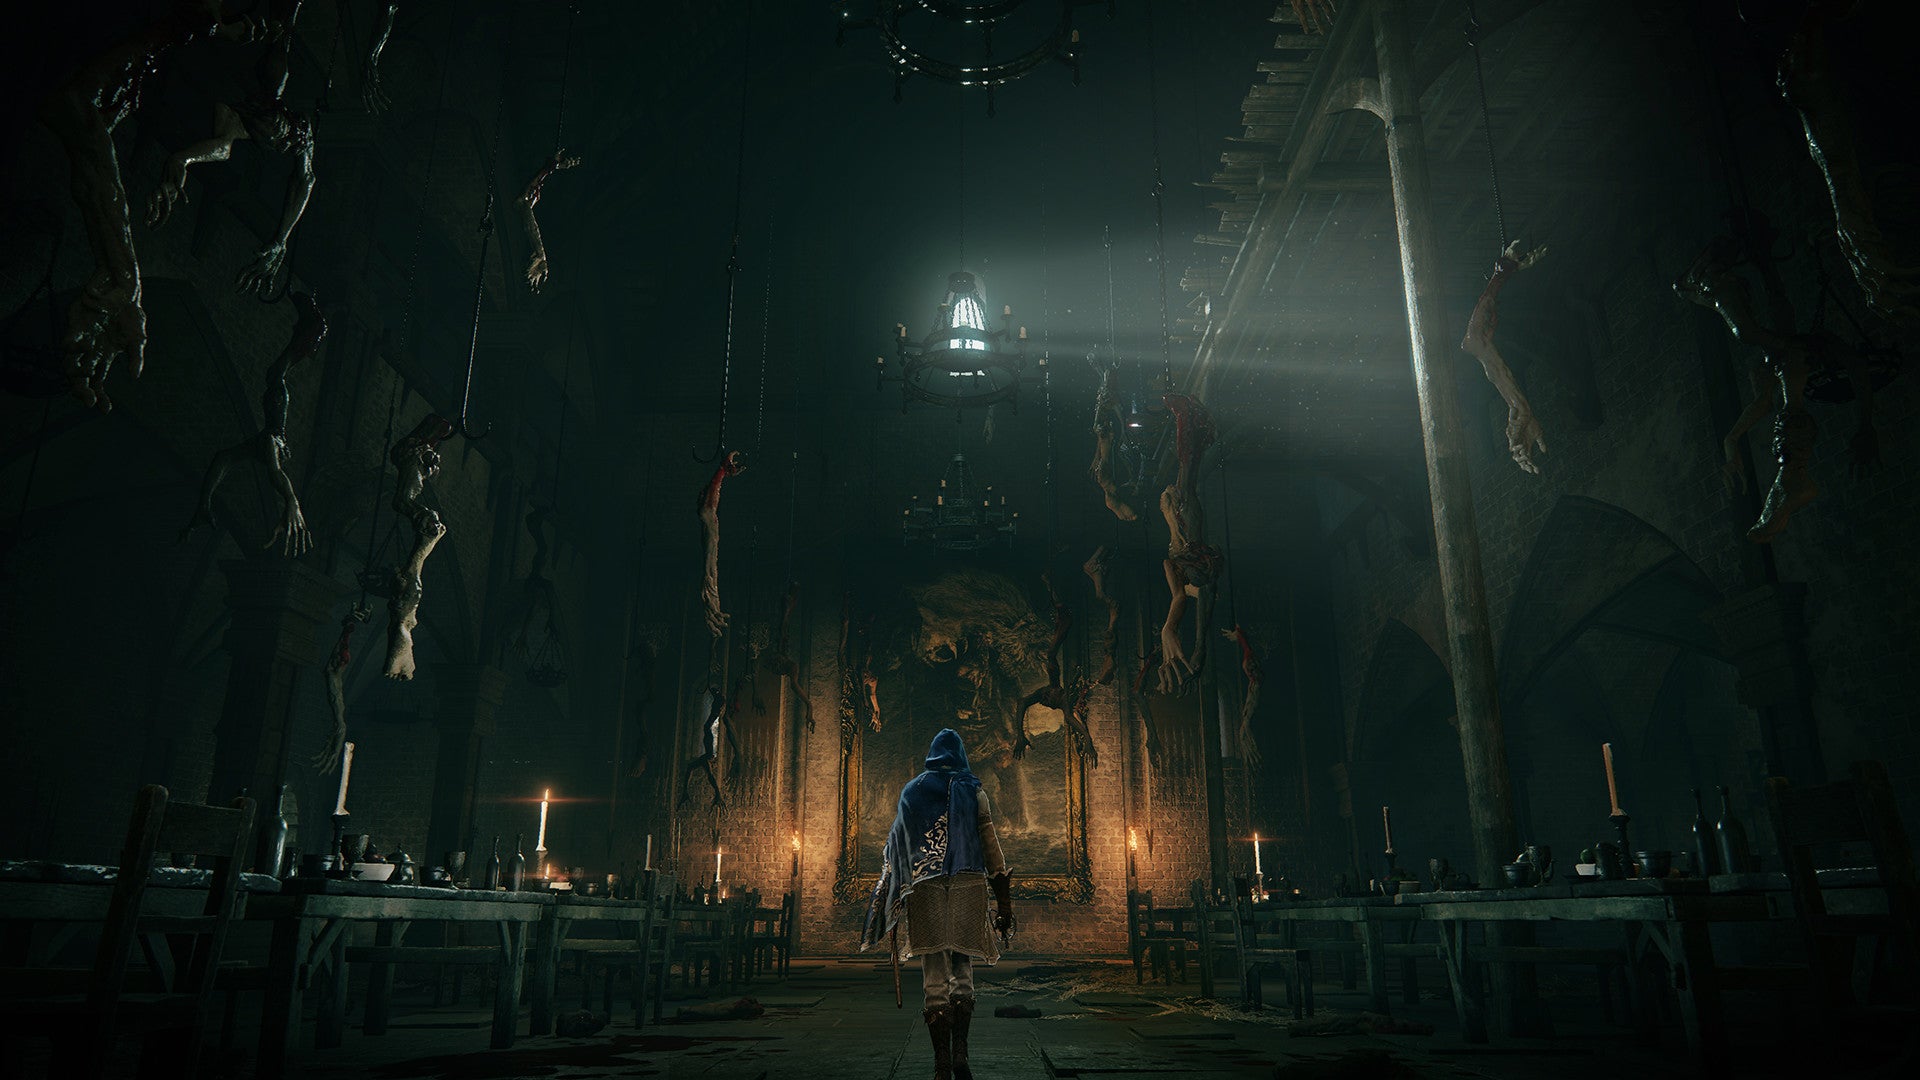 A player character walks through a church-like building with limbs hanging from the rafters in Elden Ring